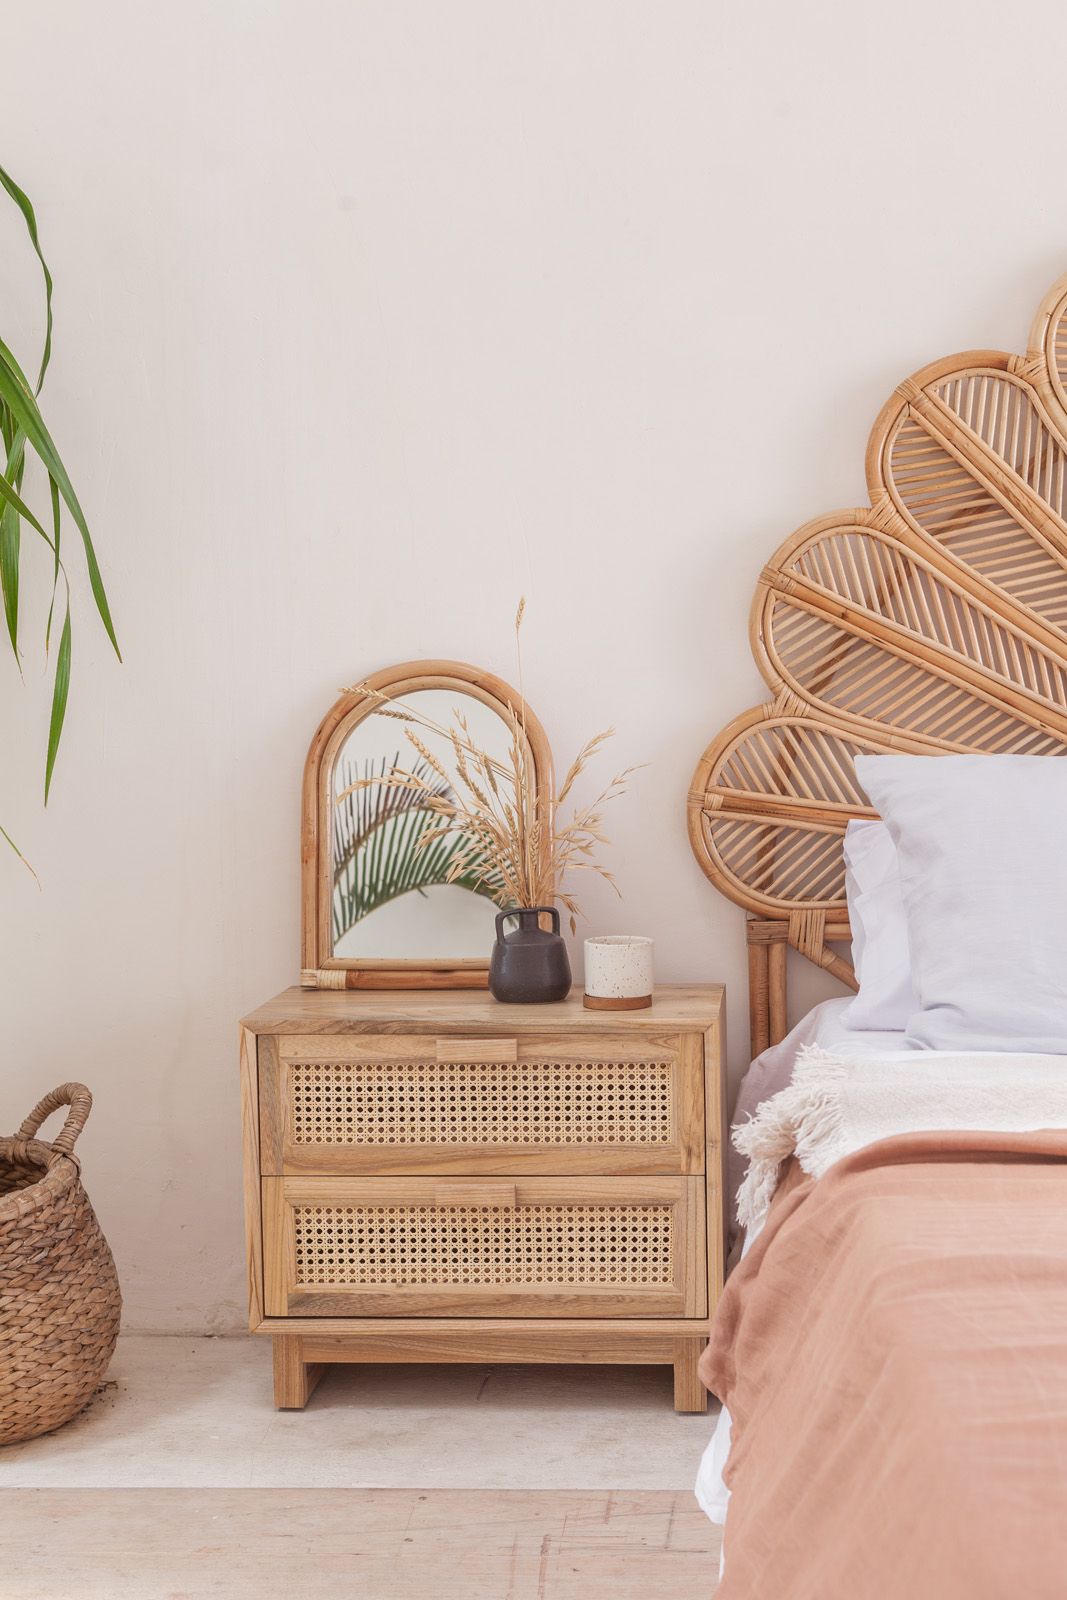 Rattan and Timber Bedside Table in A Bohemian Bedroom